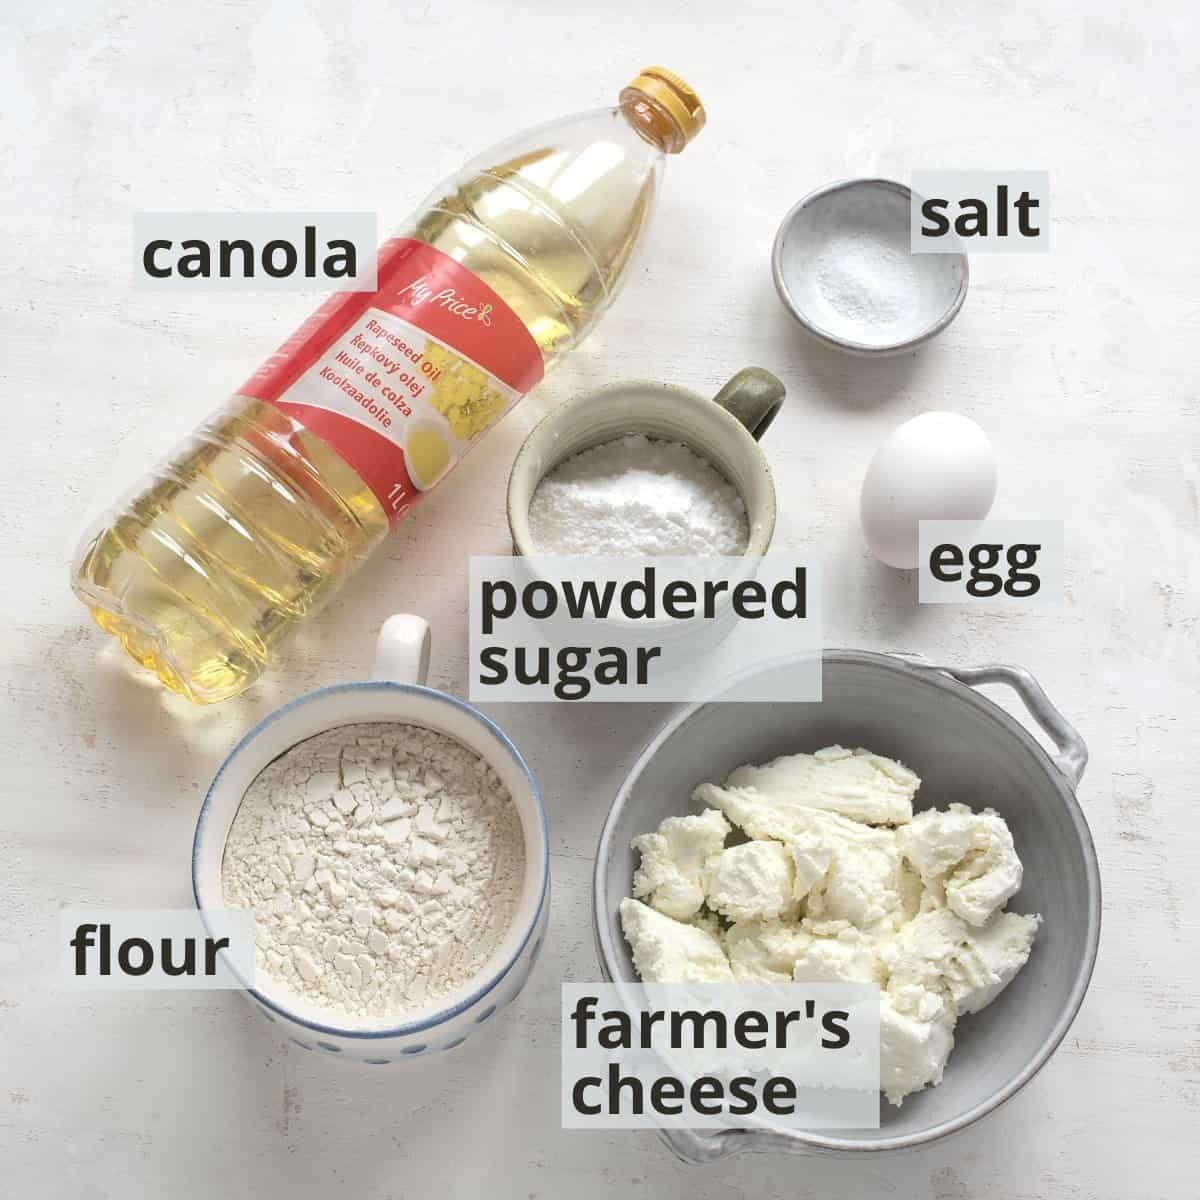 Labeled ingredients for Czech farmers cheese pancakes.